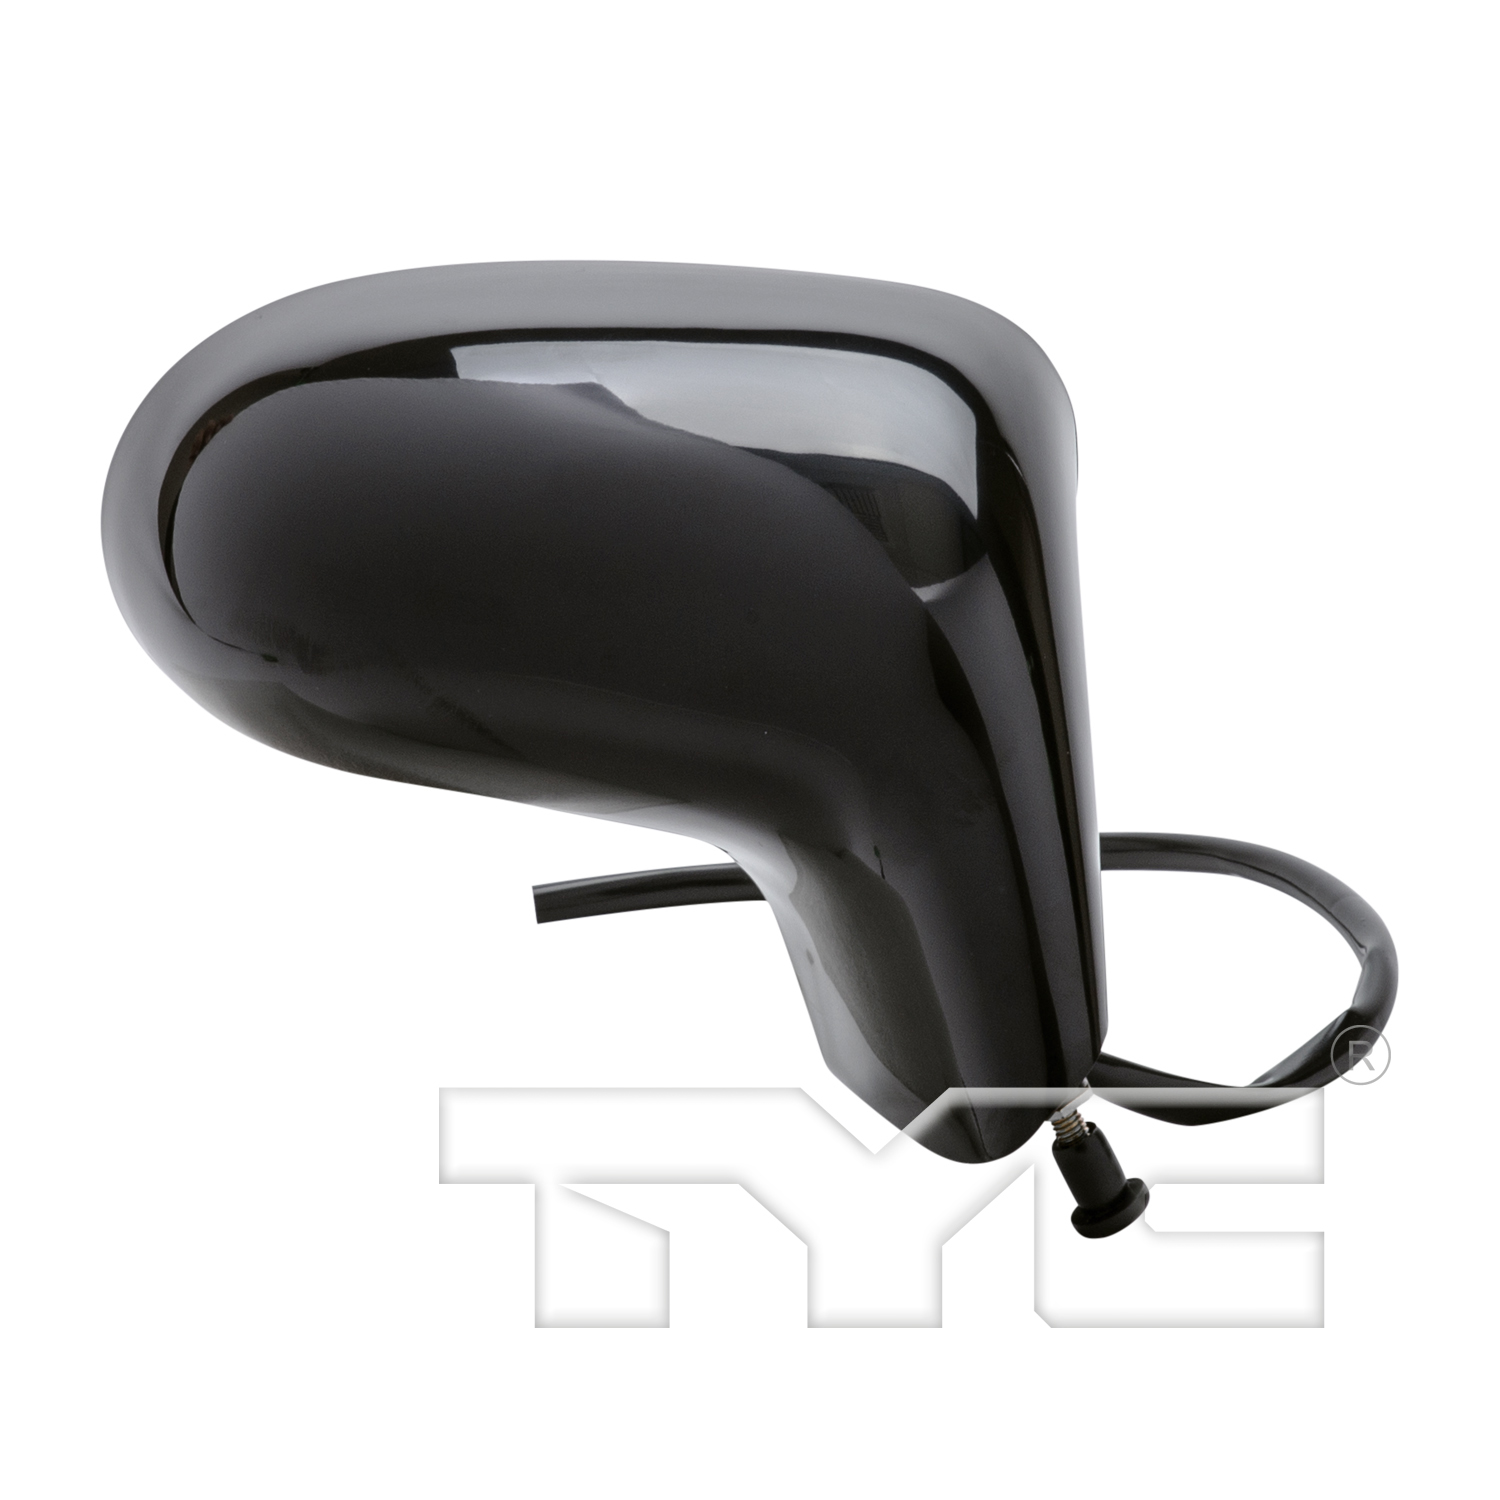 Aftermarket MIRRORS for OLDSMOBILE - 88, 88,97-99,RT Mirror outside rear view